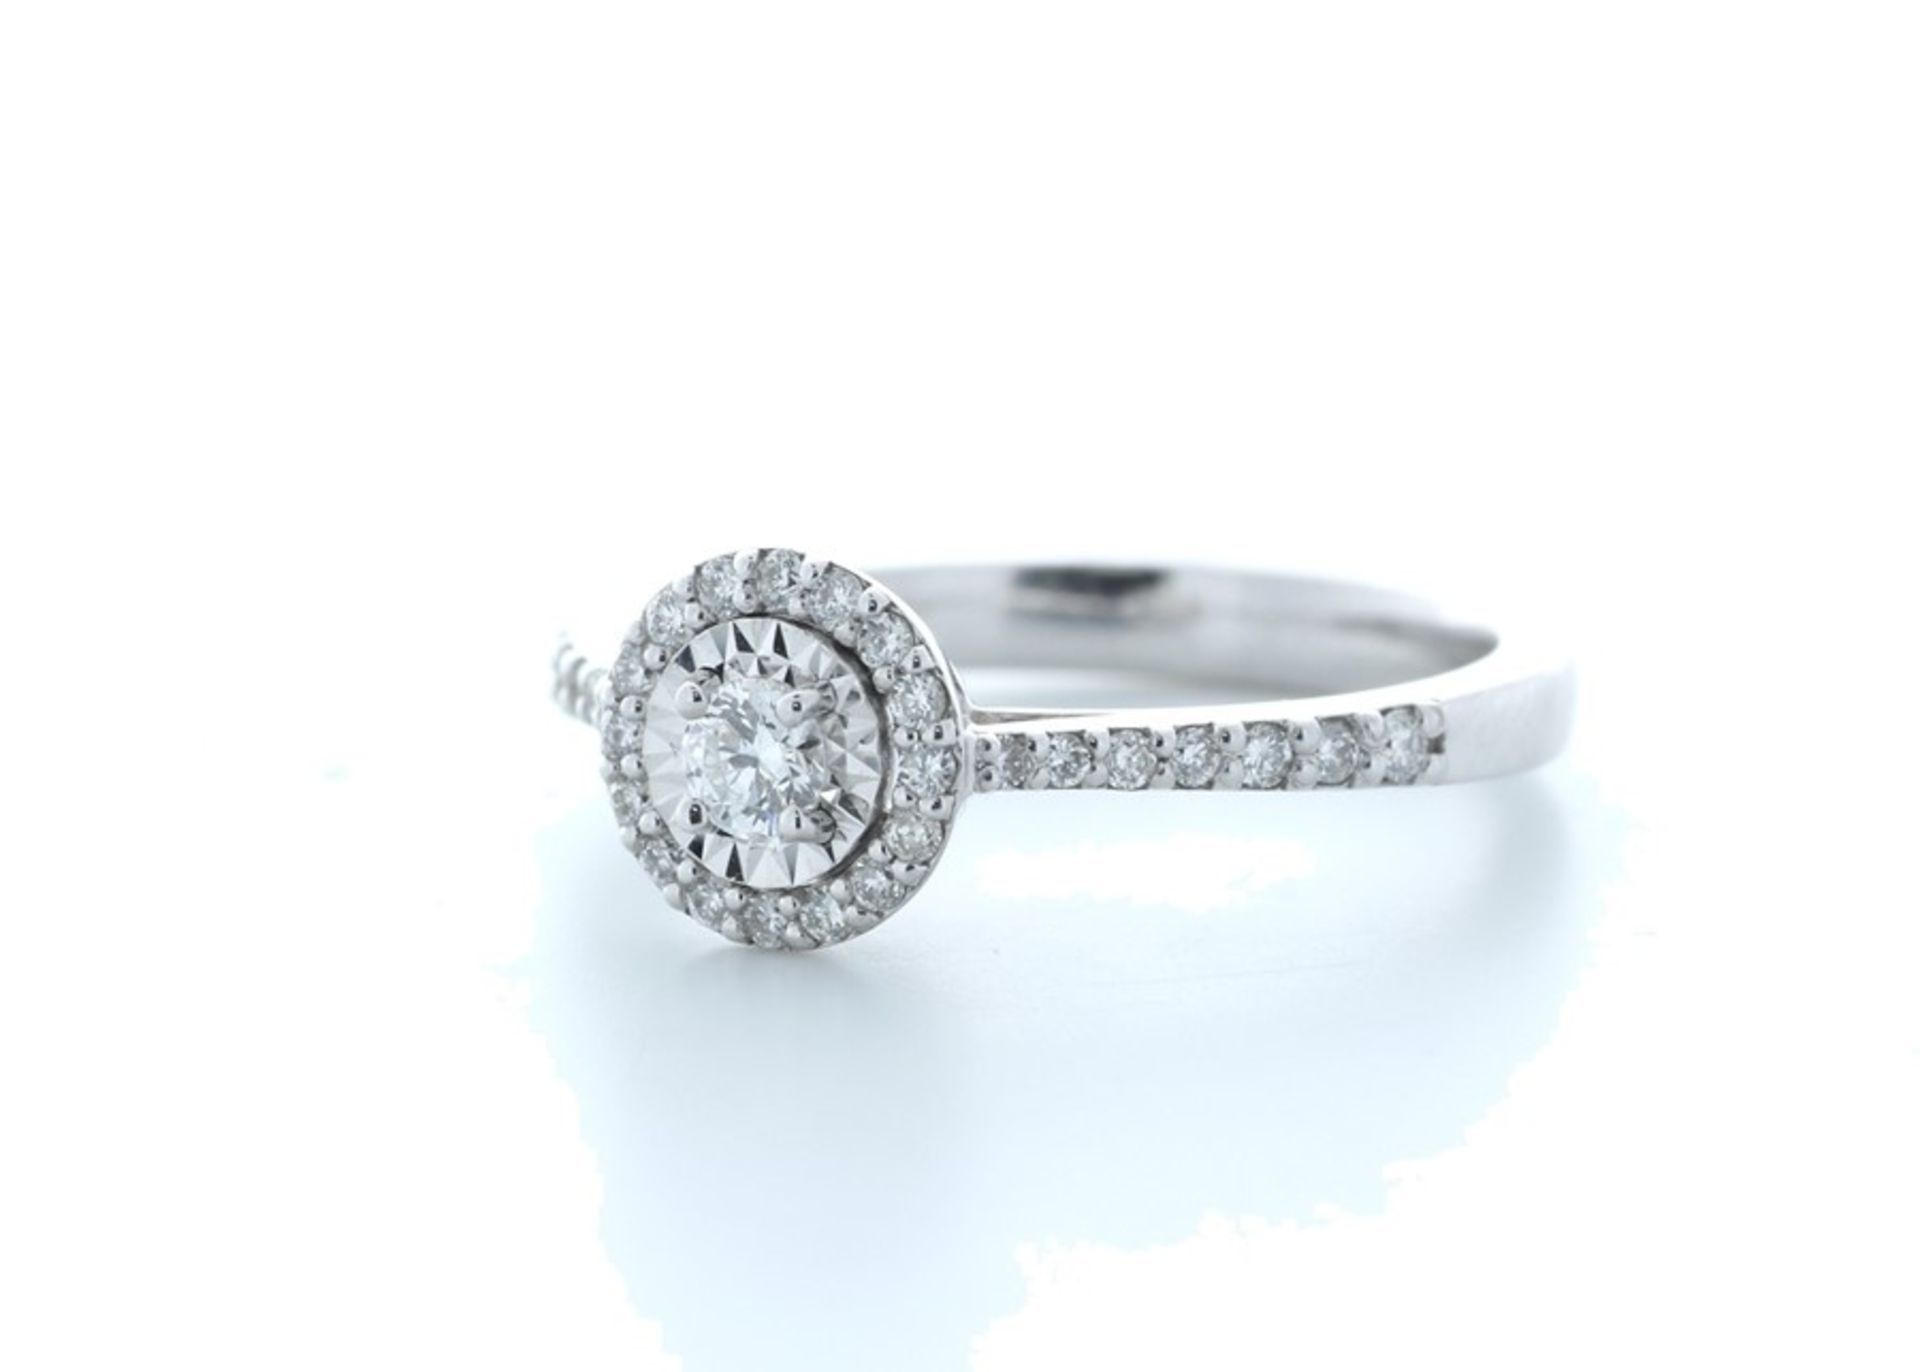 18ct White Gold Single Stone With Halo Setting Ring Valued by IDI £3,500.00 - Image 2 of 5